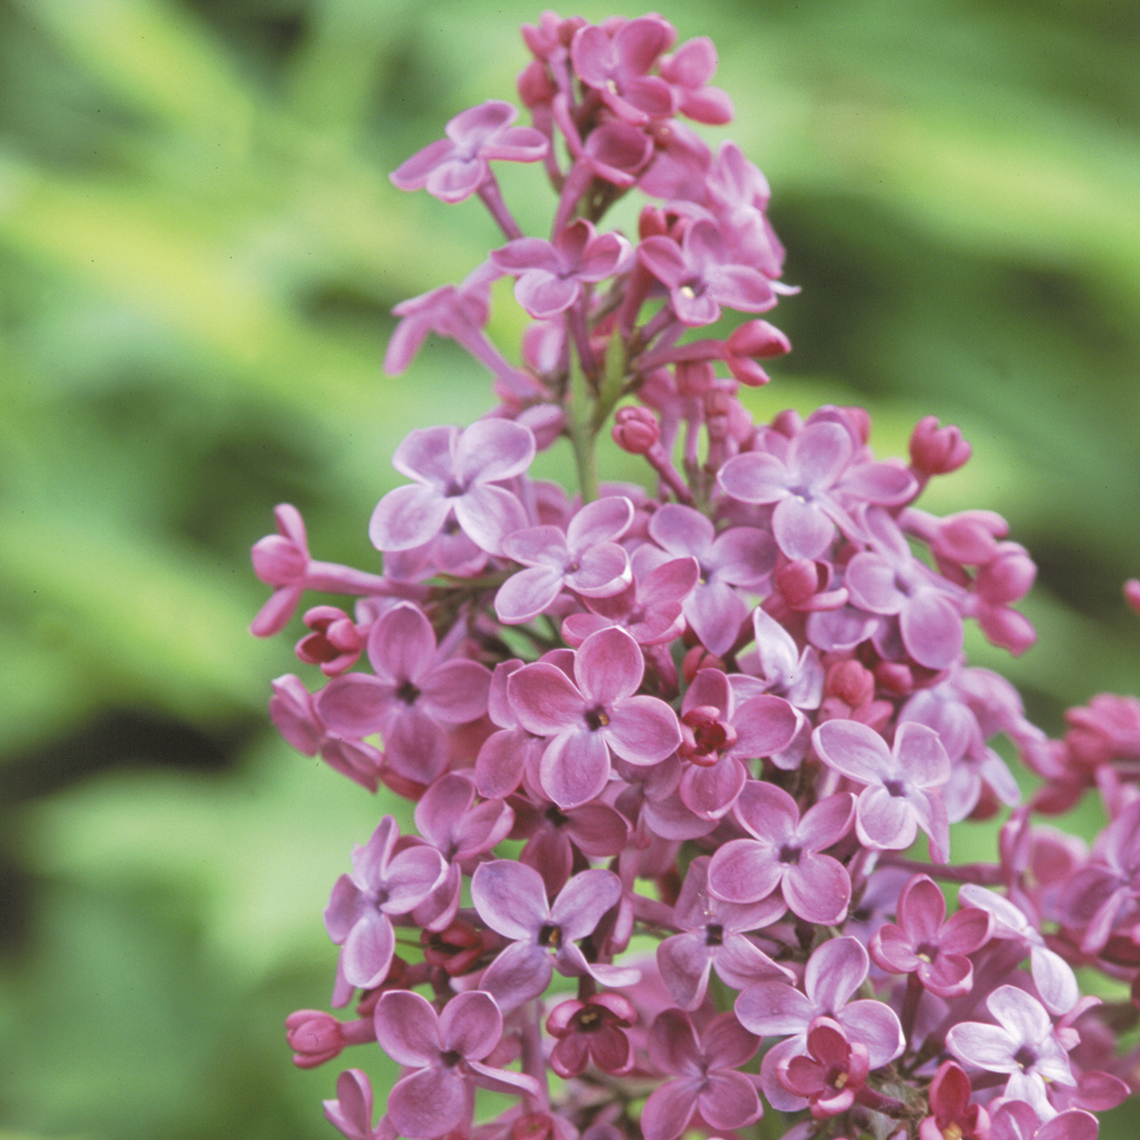 The flowers of Pocahontas lilac are a unique red purple color